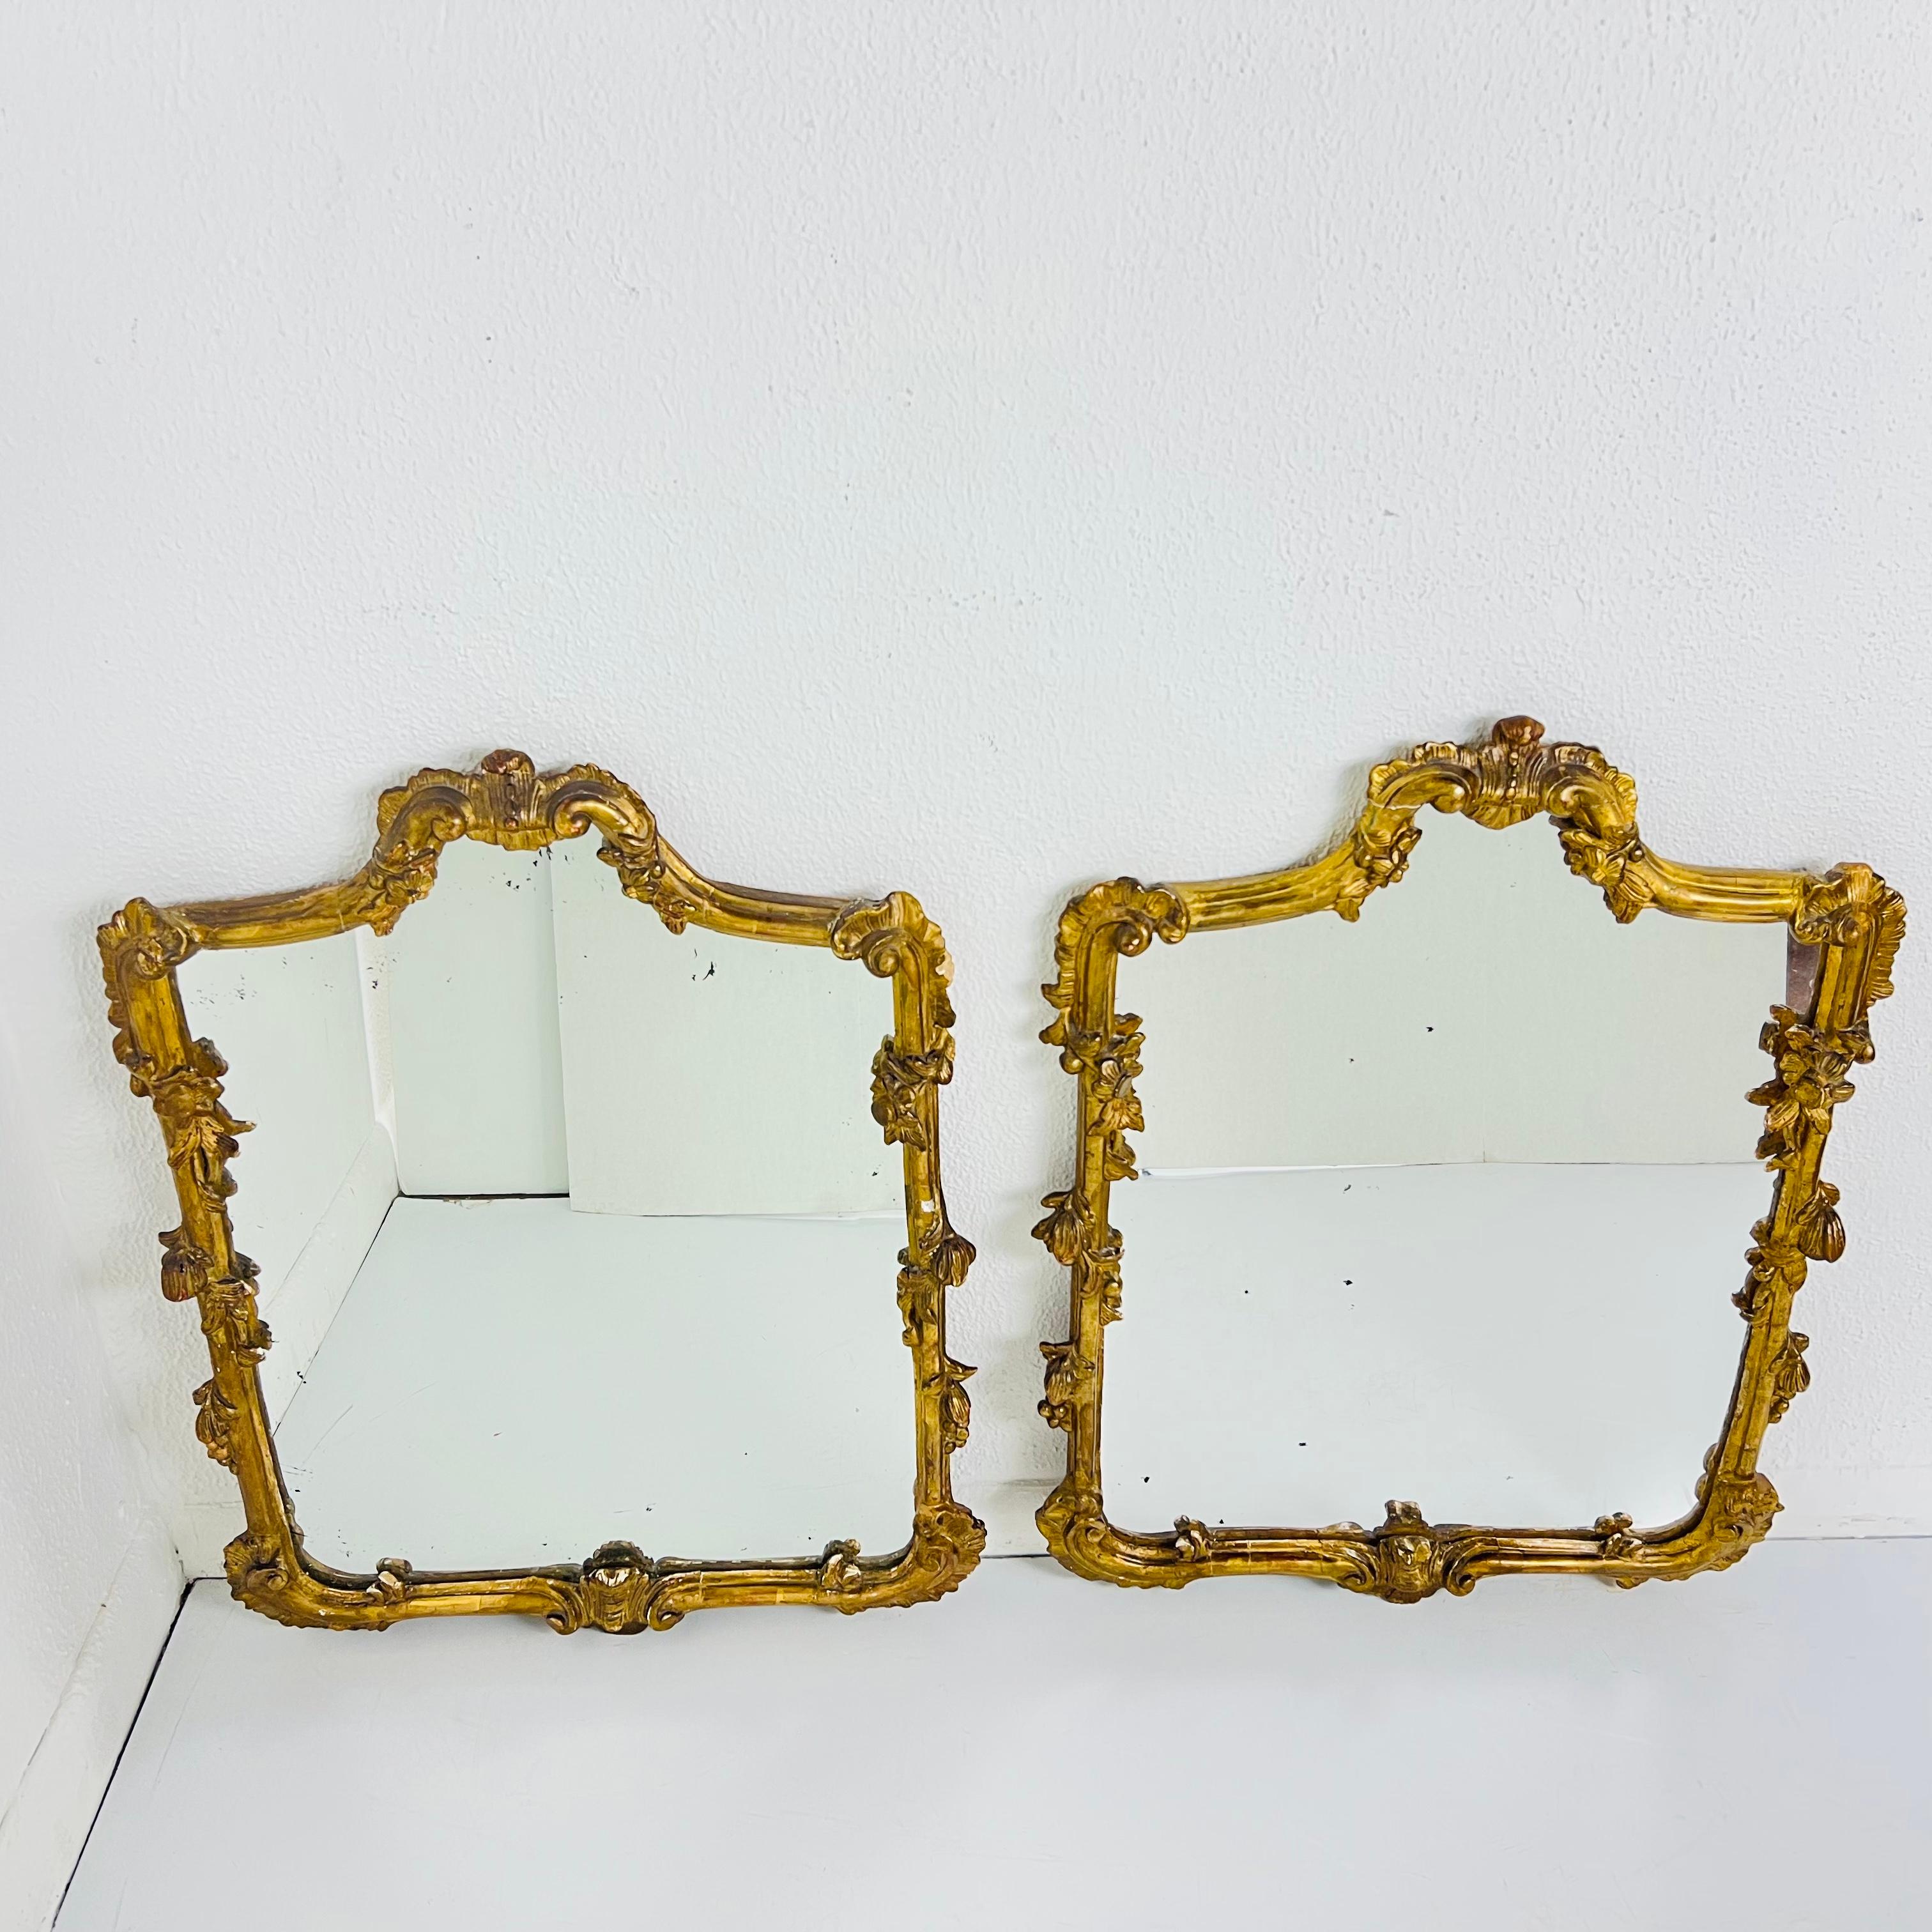 Pair of ornate vintage gilded plaster and wood wall mirrors with antiqued glass. Some cosmetic imperfections including crack at top left of one mirror and chips/dings at various spots in frames.